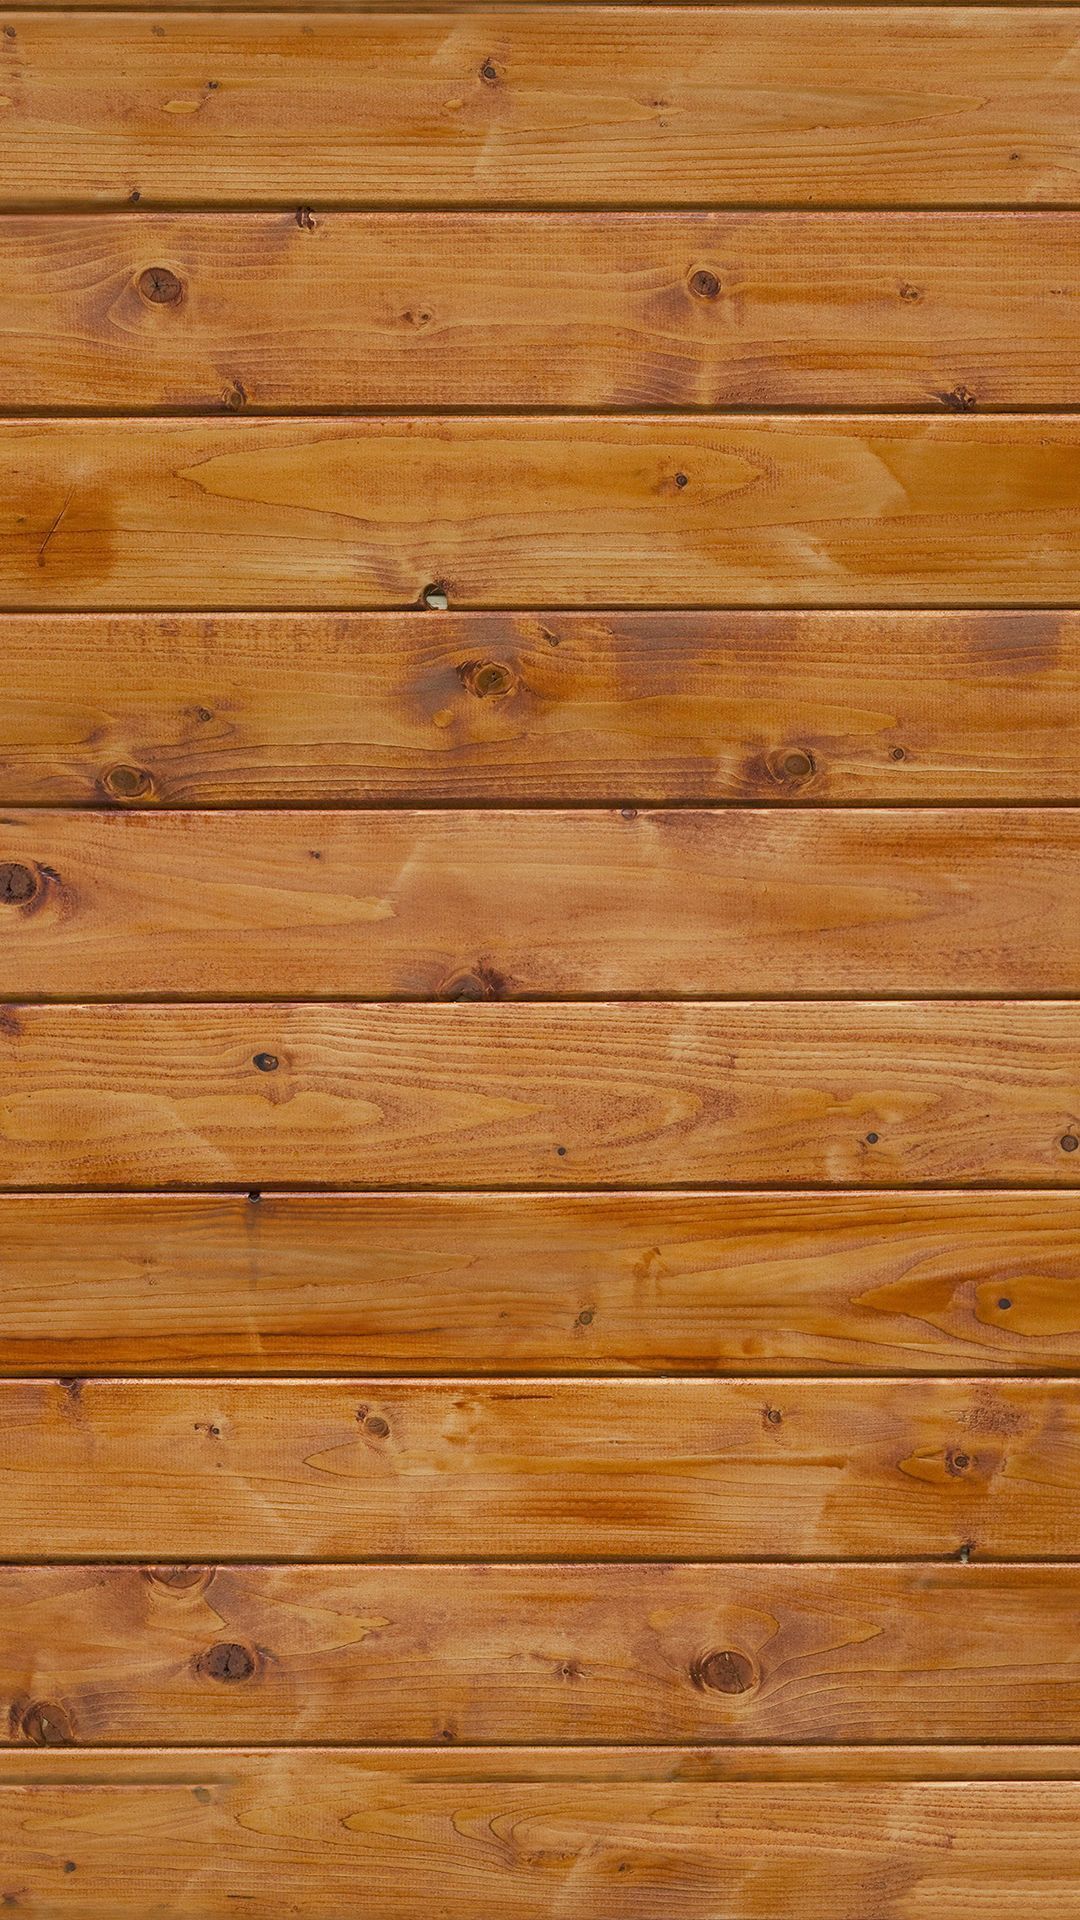 Wood Plank Texture Pattern iPhone 6 Wallpaper Download | iPhone ...